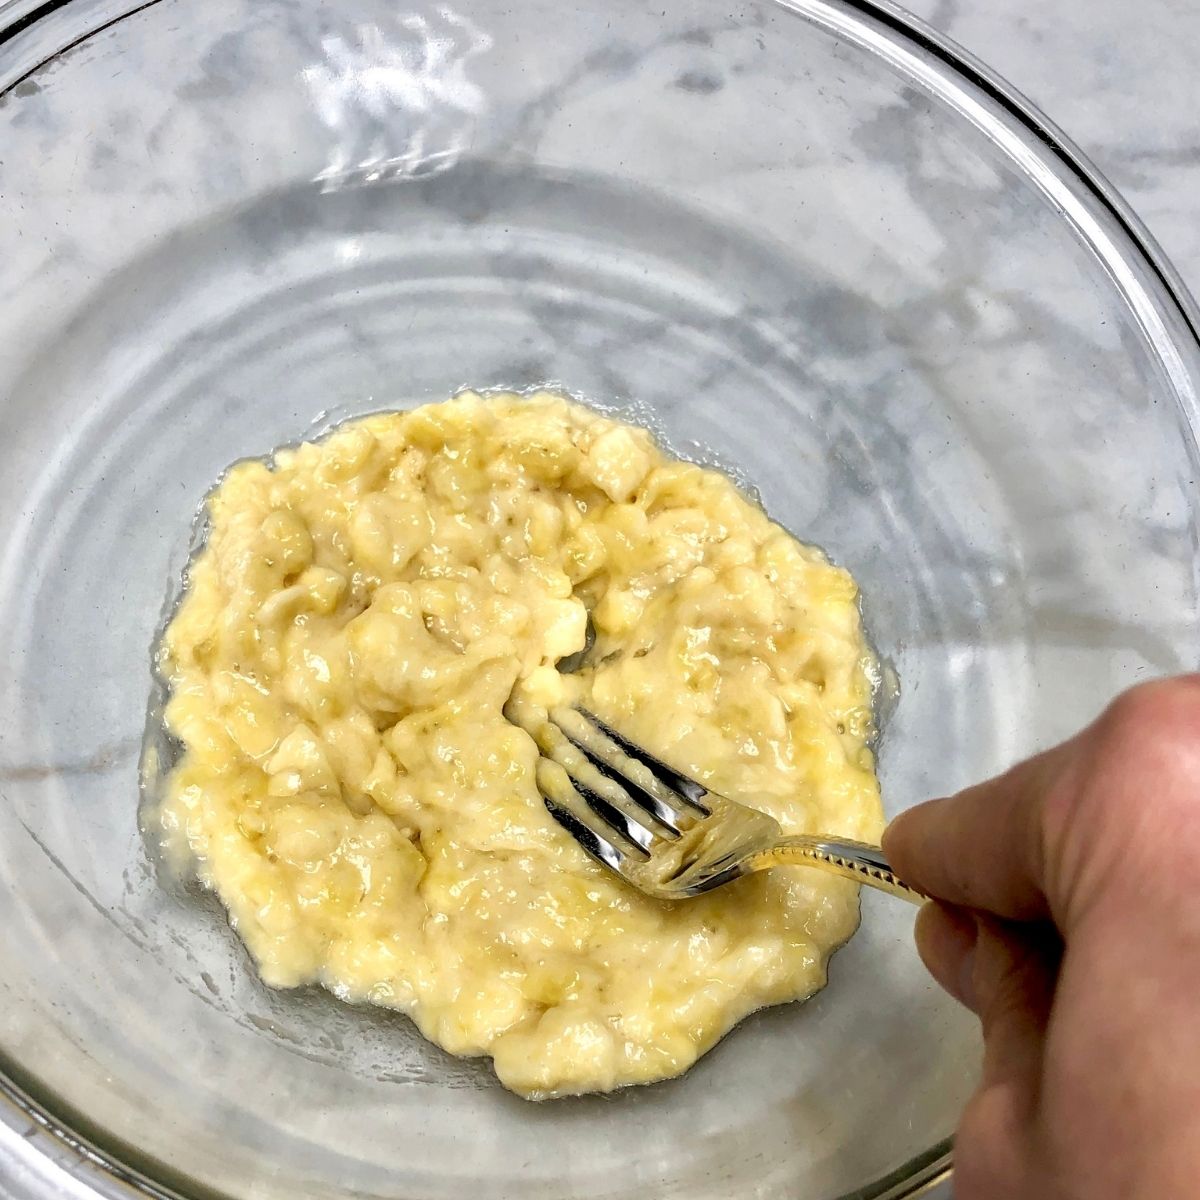 Mashed Banana in a glass mixing bowl.